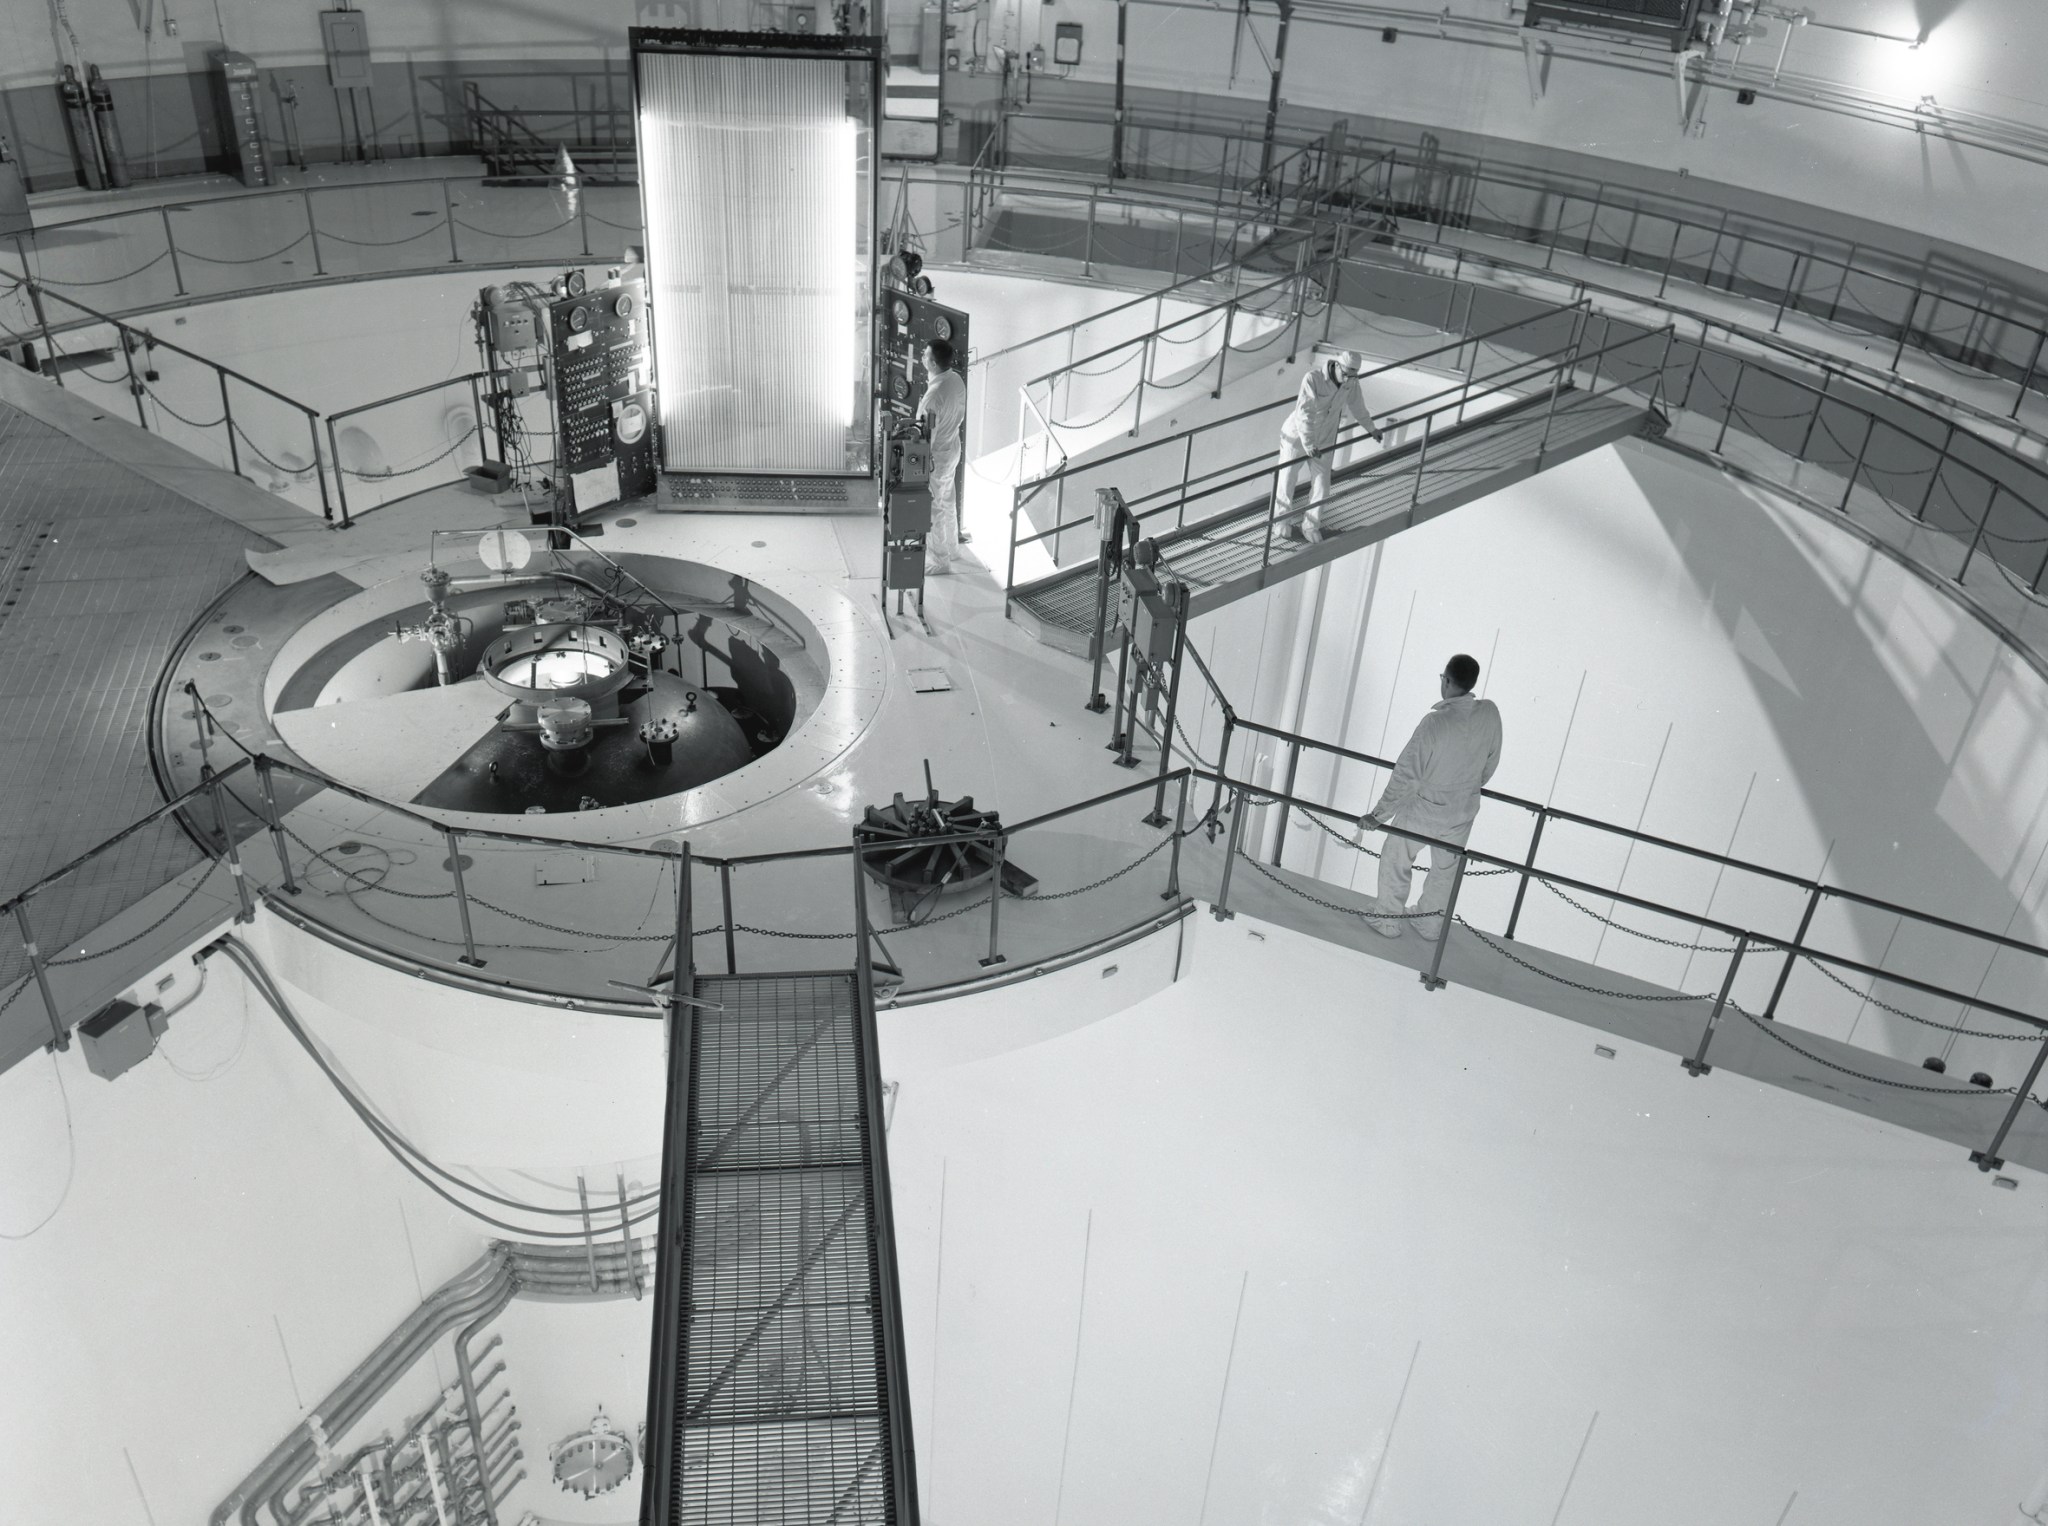 Interior view of the reactor containment vessel.